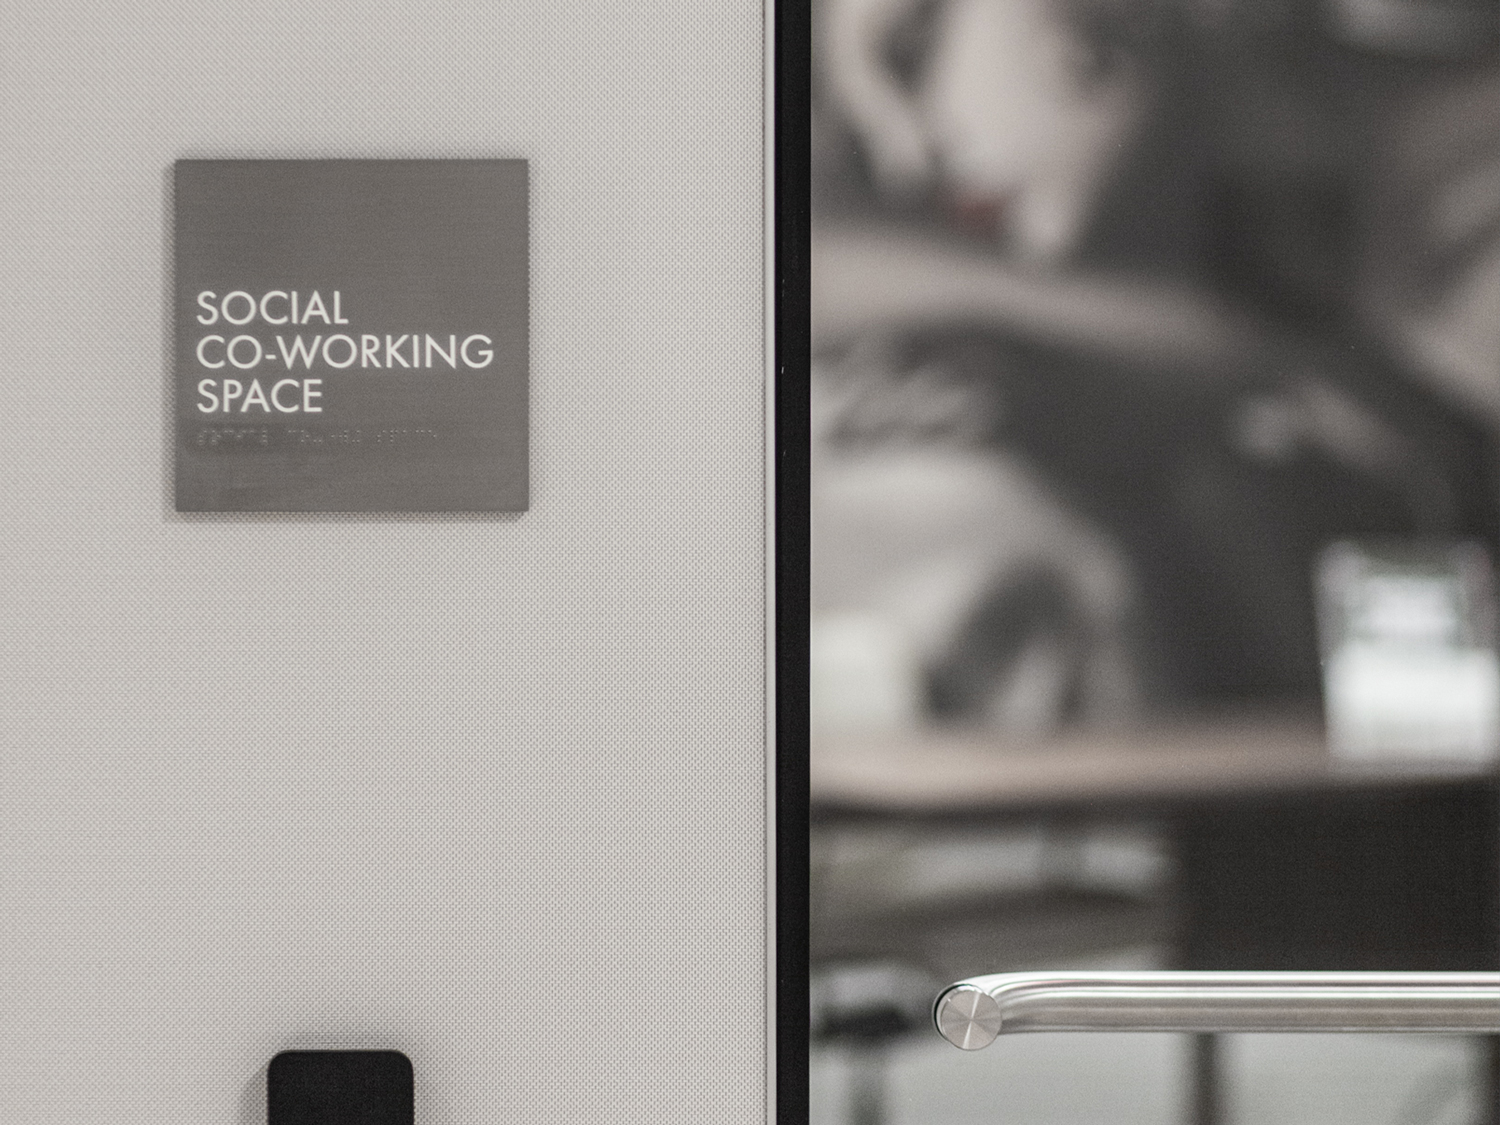 Detail shot ofmetal ADA sign, reads "SOCIAL CO-WORKING SPACE"